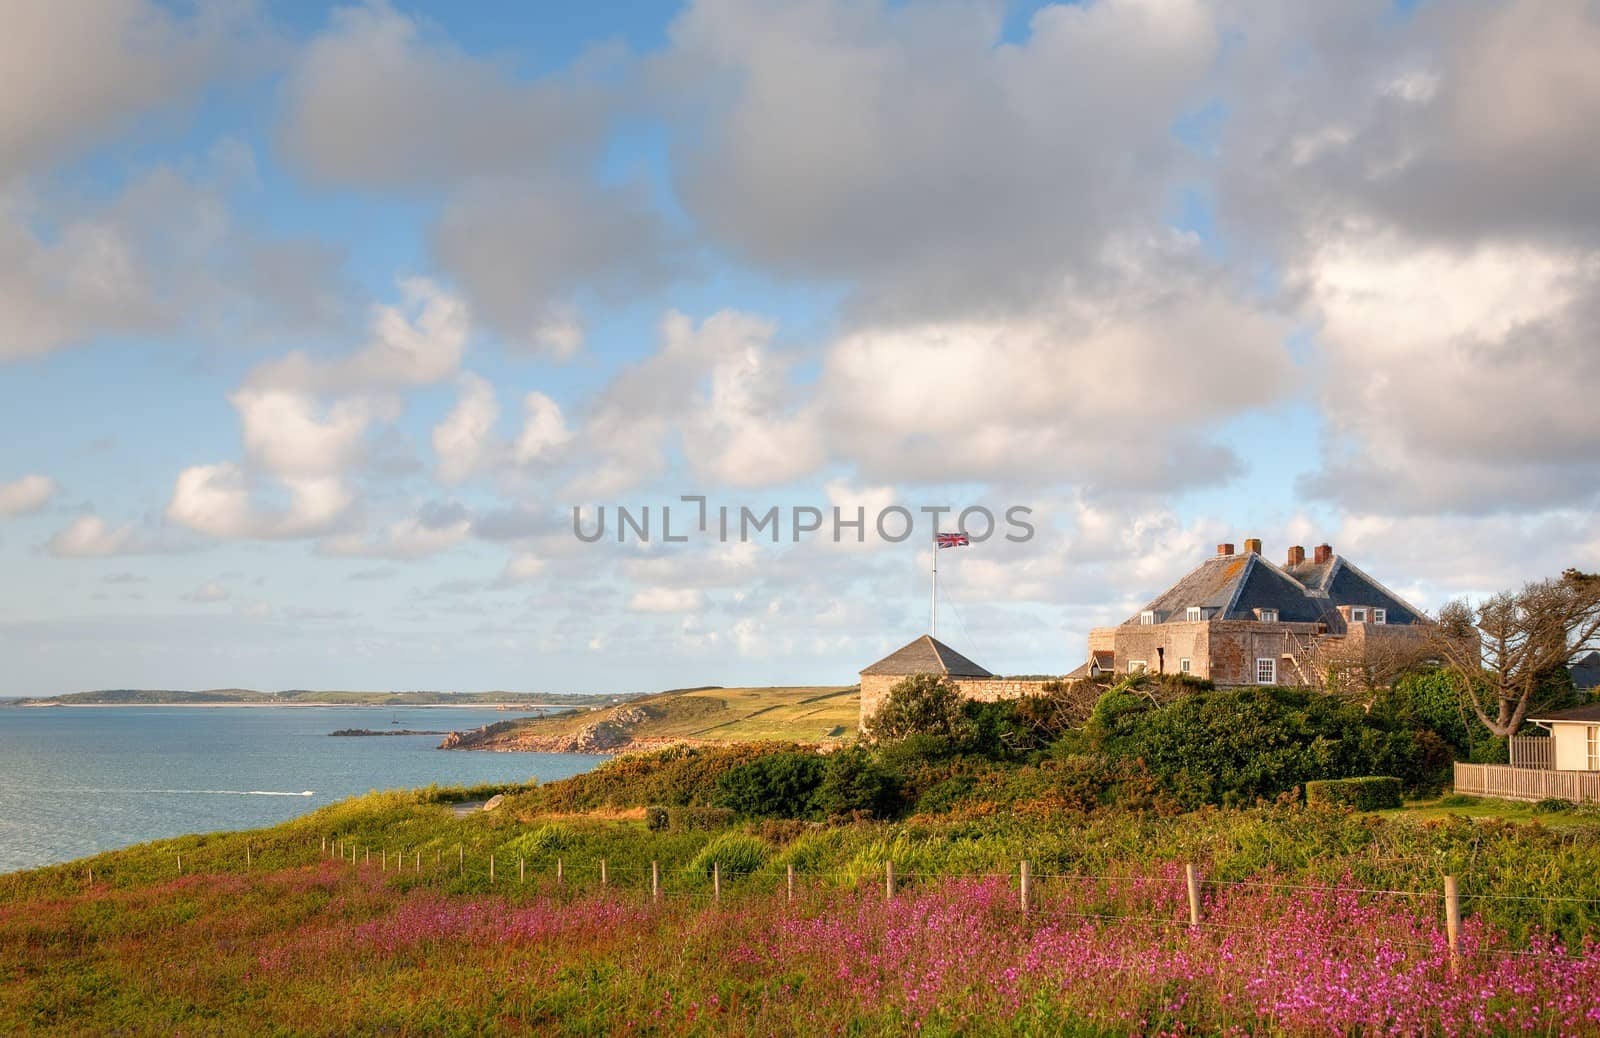 St Mary's, Isles of Scilly by andrewroland